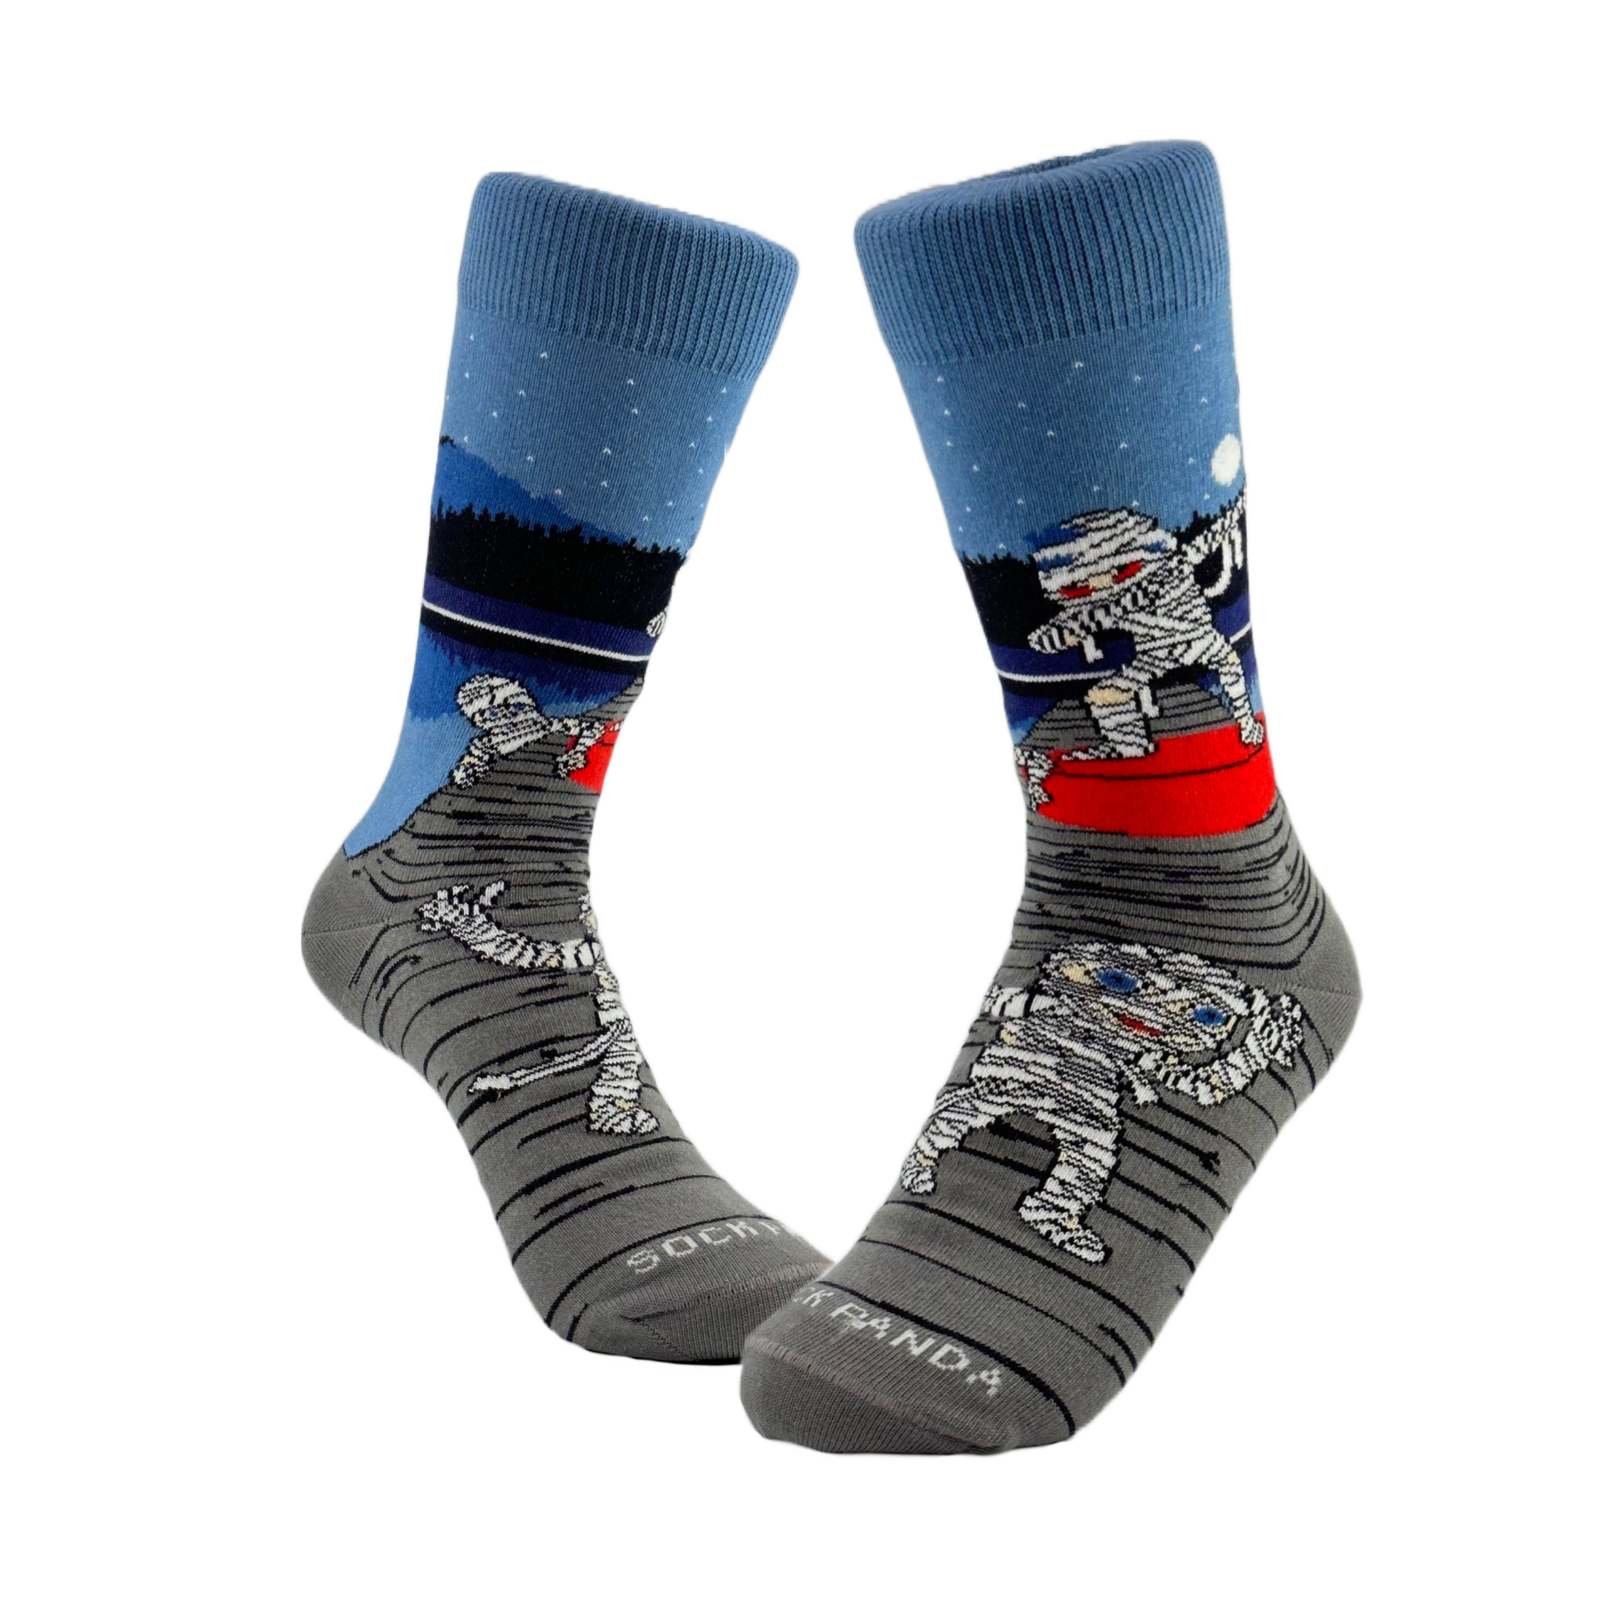 Primary image for Mummy Night Out Socks from the Sock Panda (Adult Small)